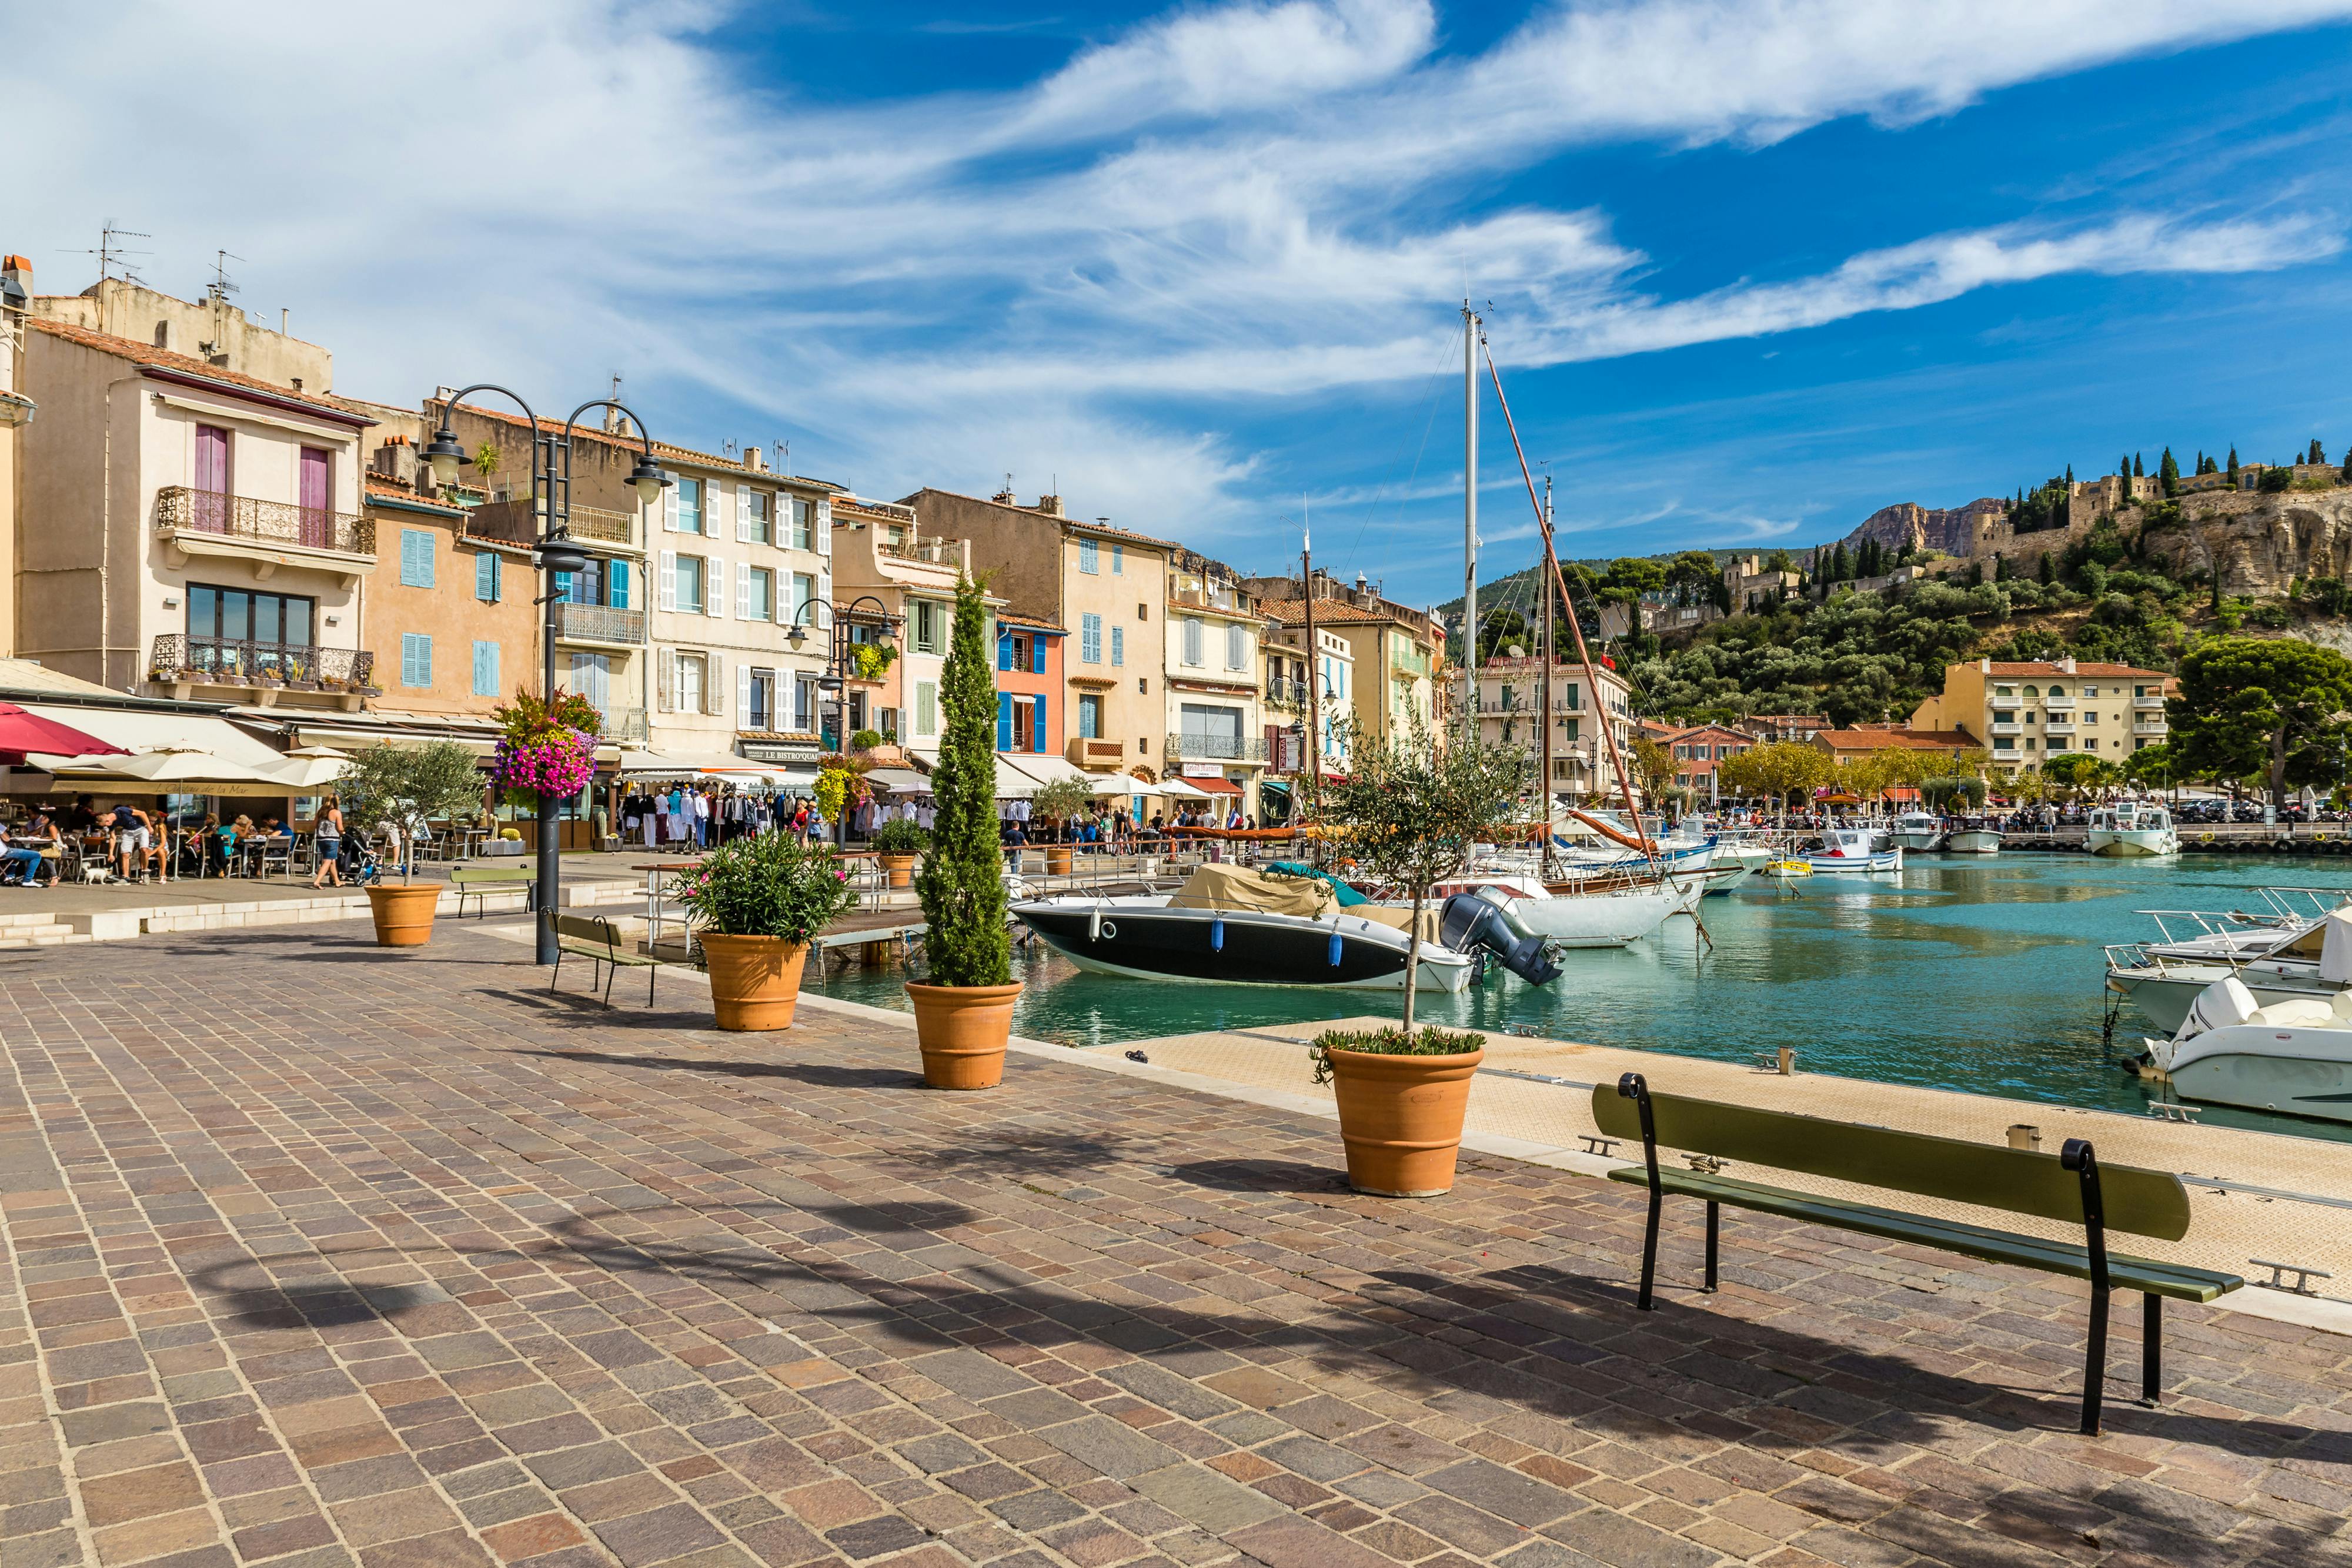 Morning tour of Cassis from Aix en Provence